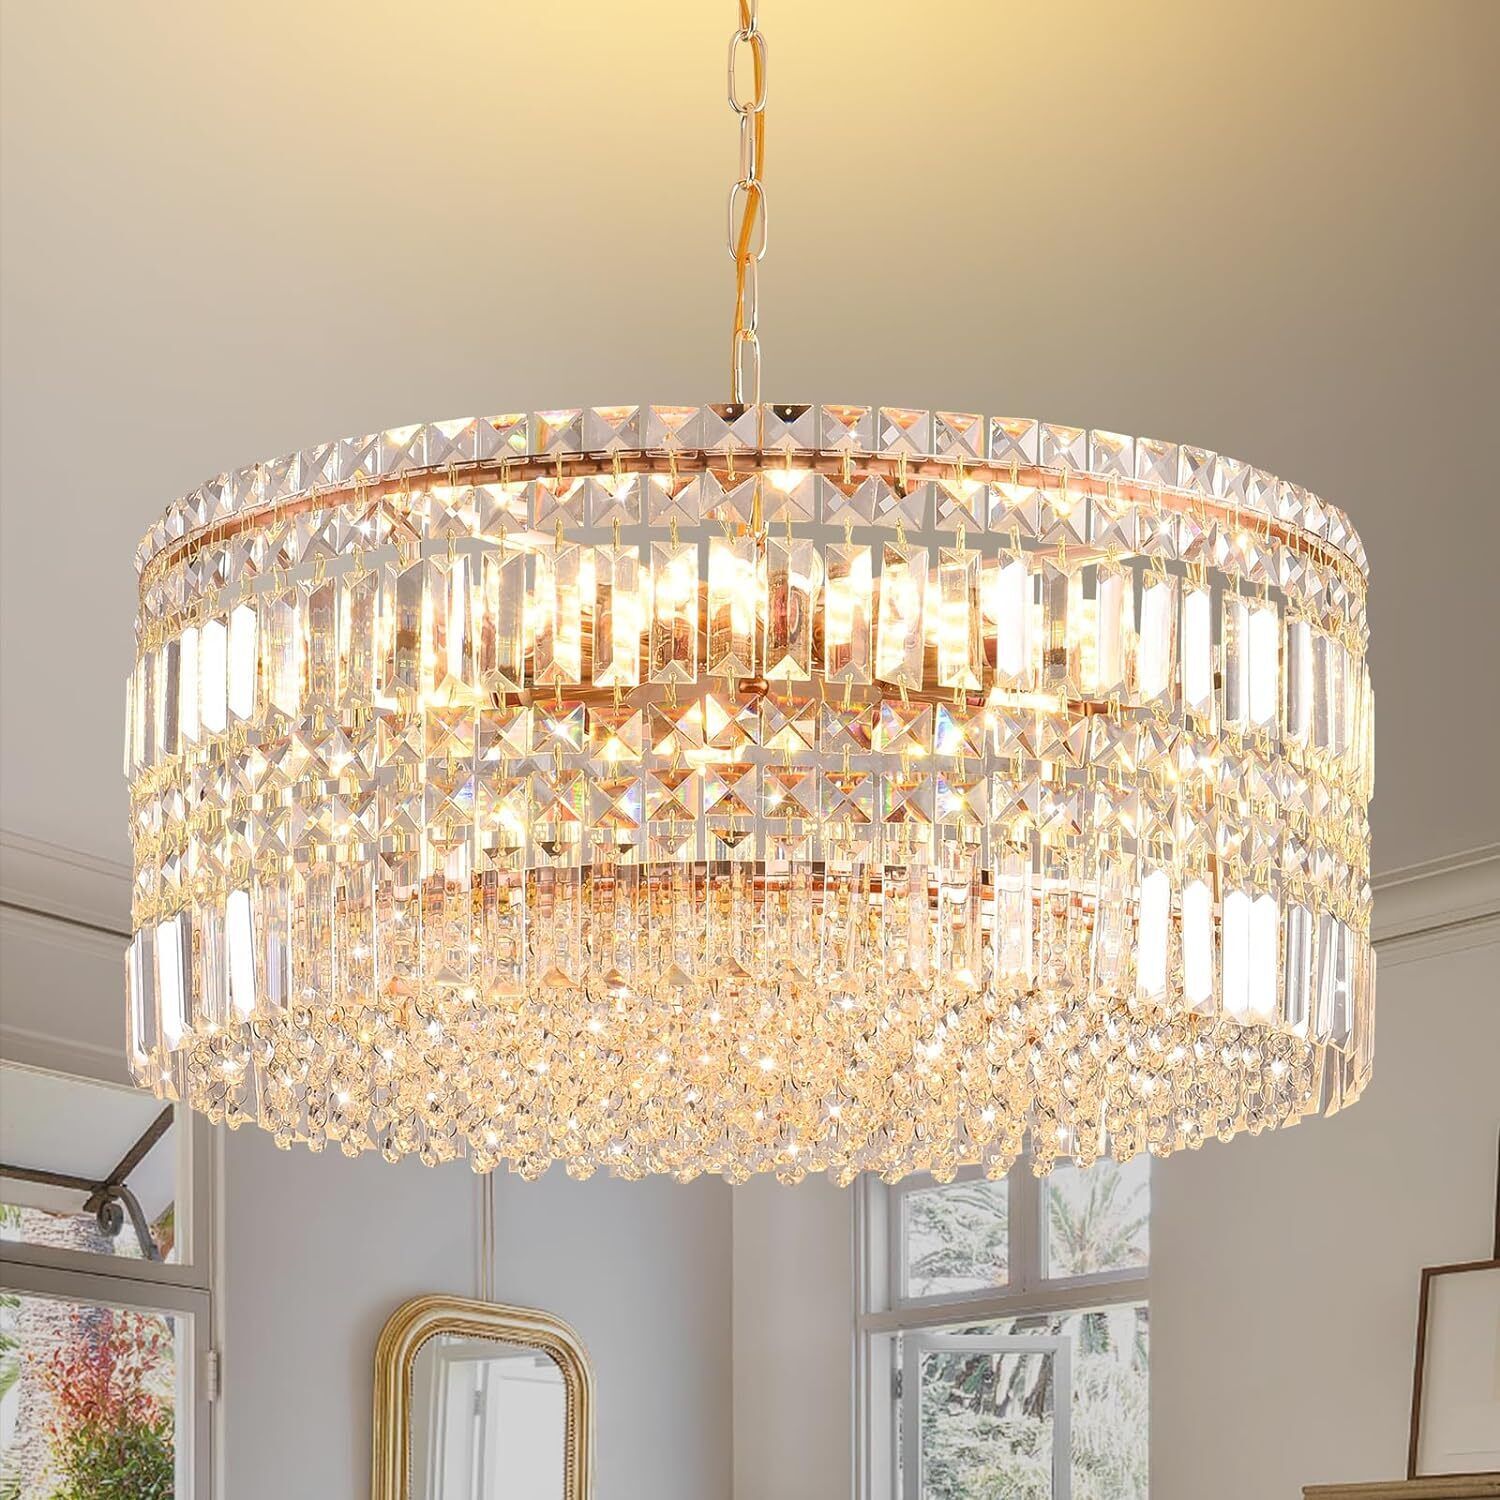 Contemporary Gold Crystal Ceiling Light - Ideal for Various Rooms - 23.6\'\'